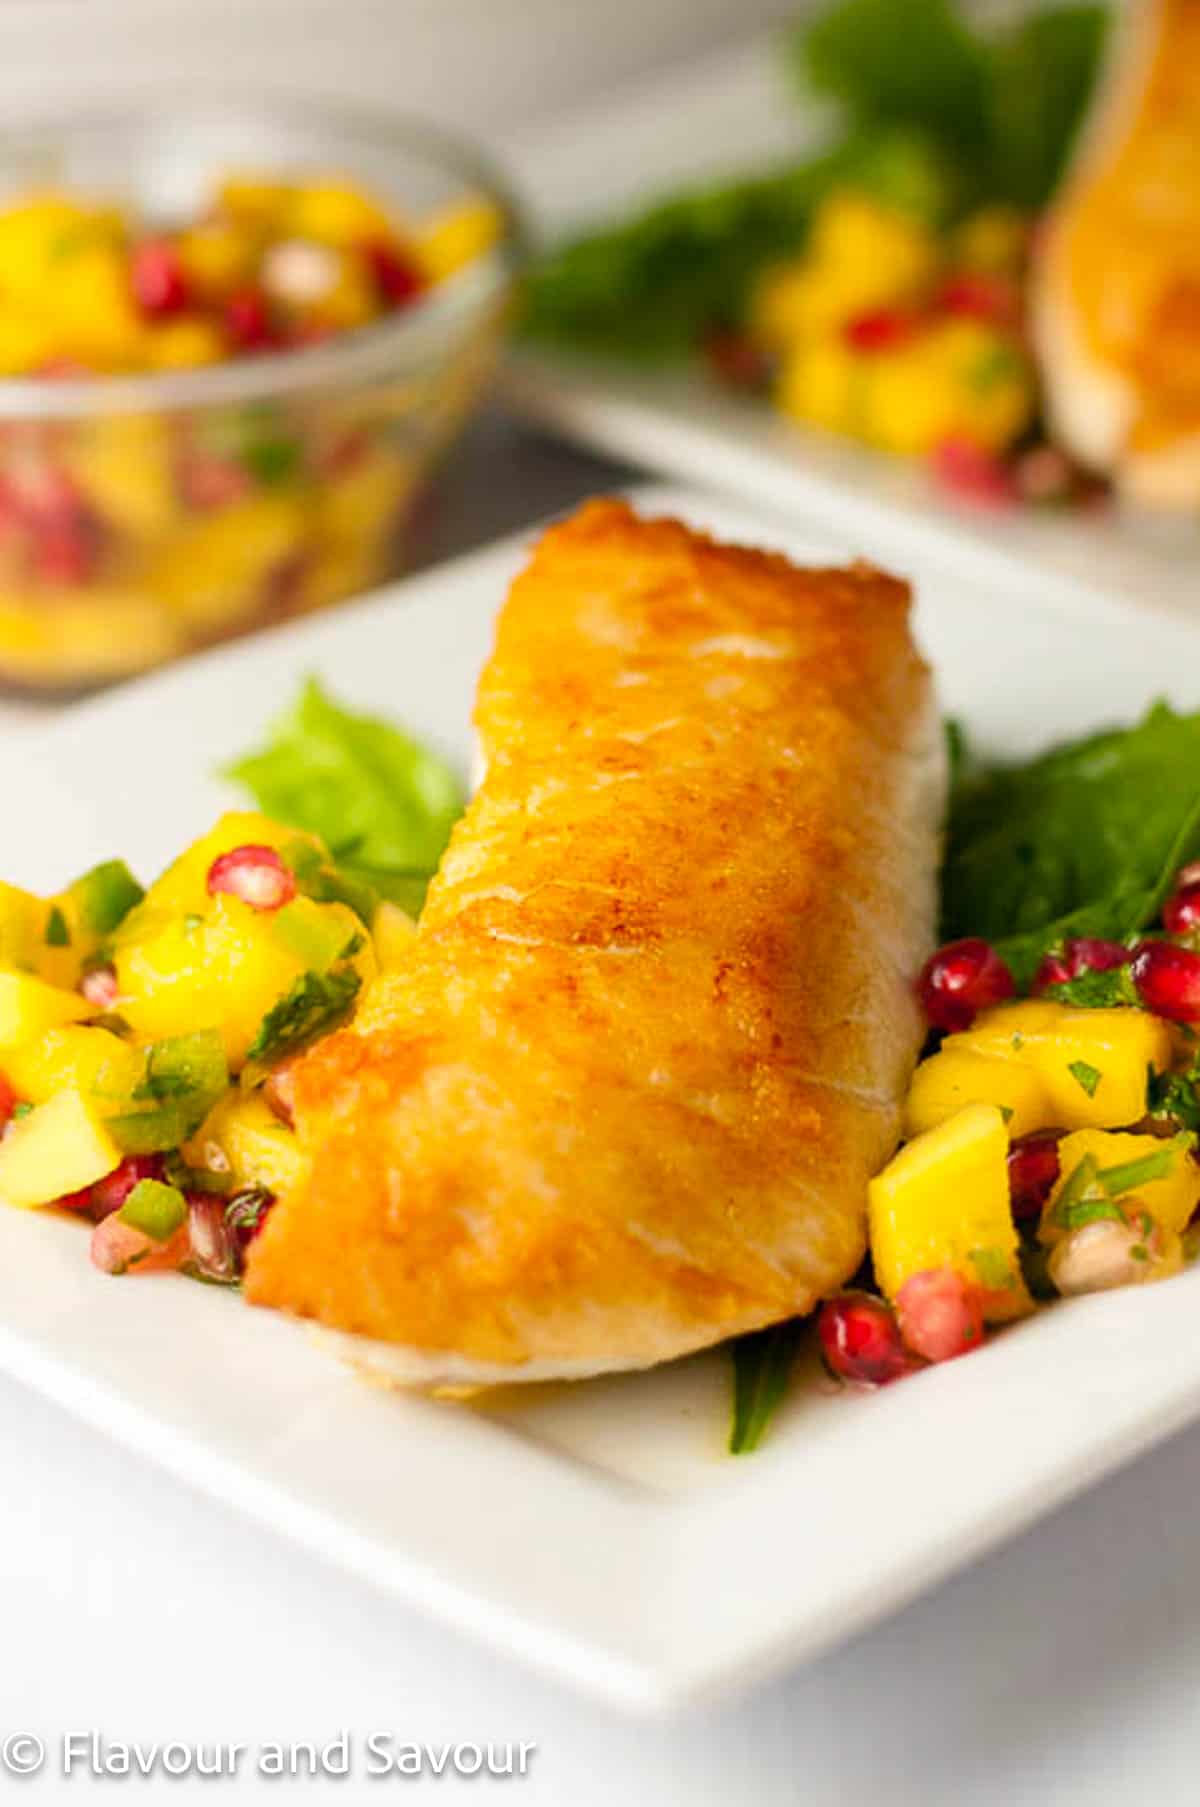 Salt and pepper crusted halibut fillet on a white plate with mango-pomegranate salsa.